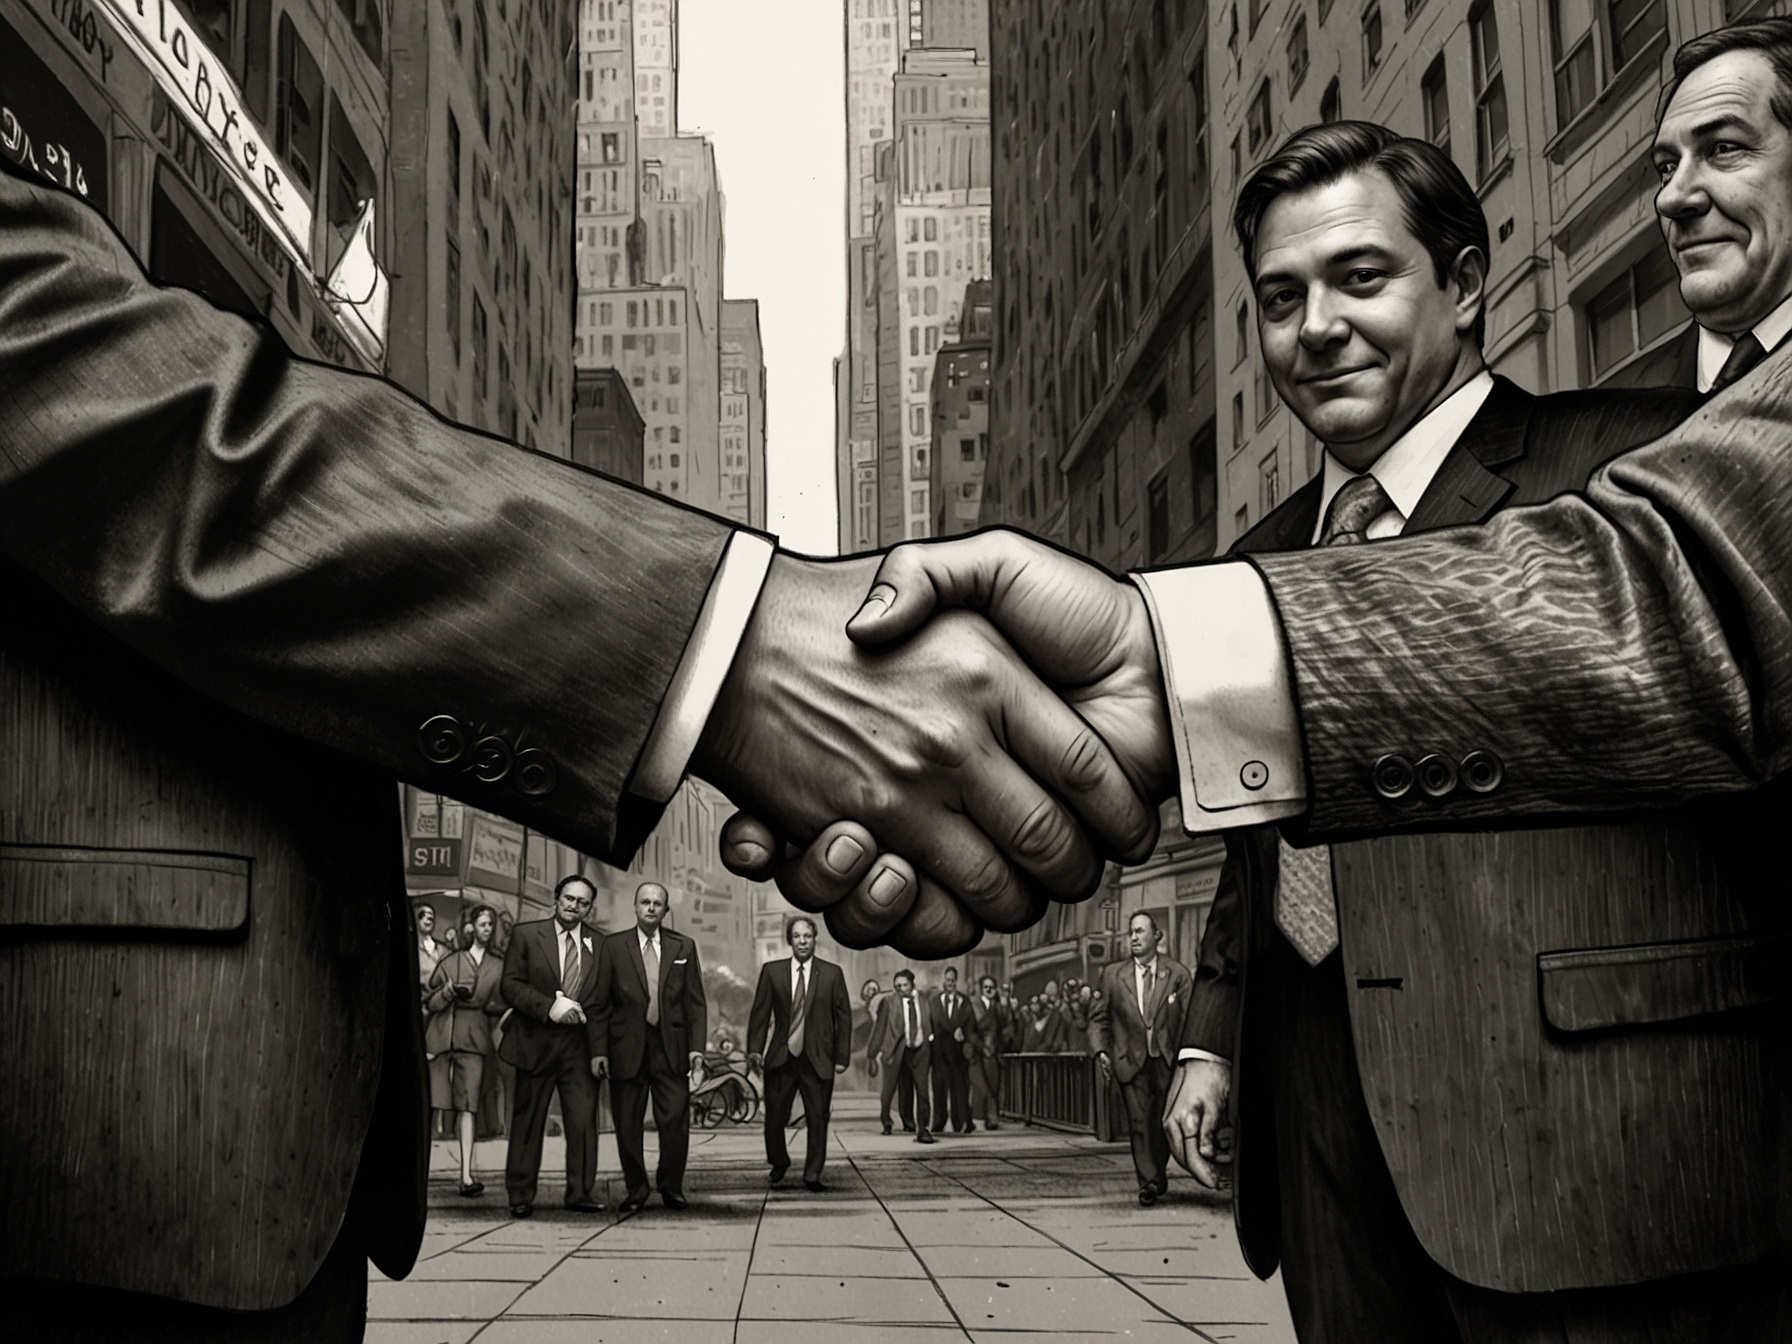 A graphic depicting a handshake between representatives of a Wall Street megabank and a midsize company, symbolizing the lucrative and symbiotic relationship fostered through financial advisory services.